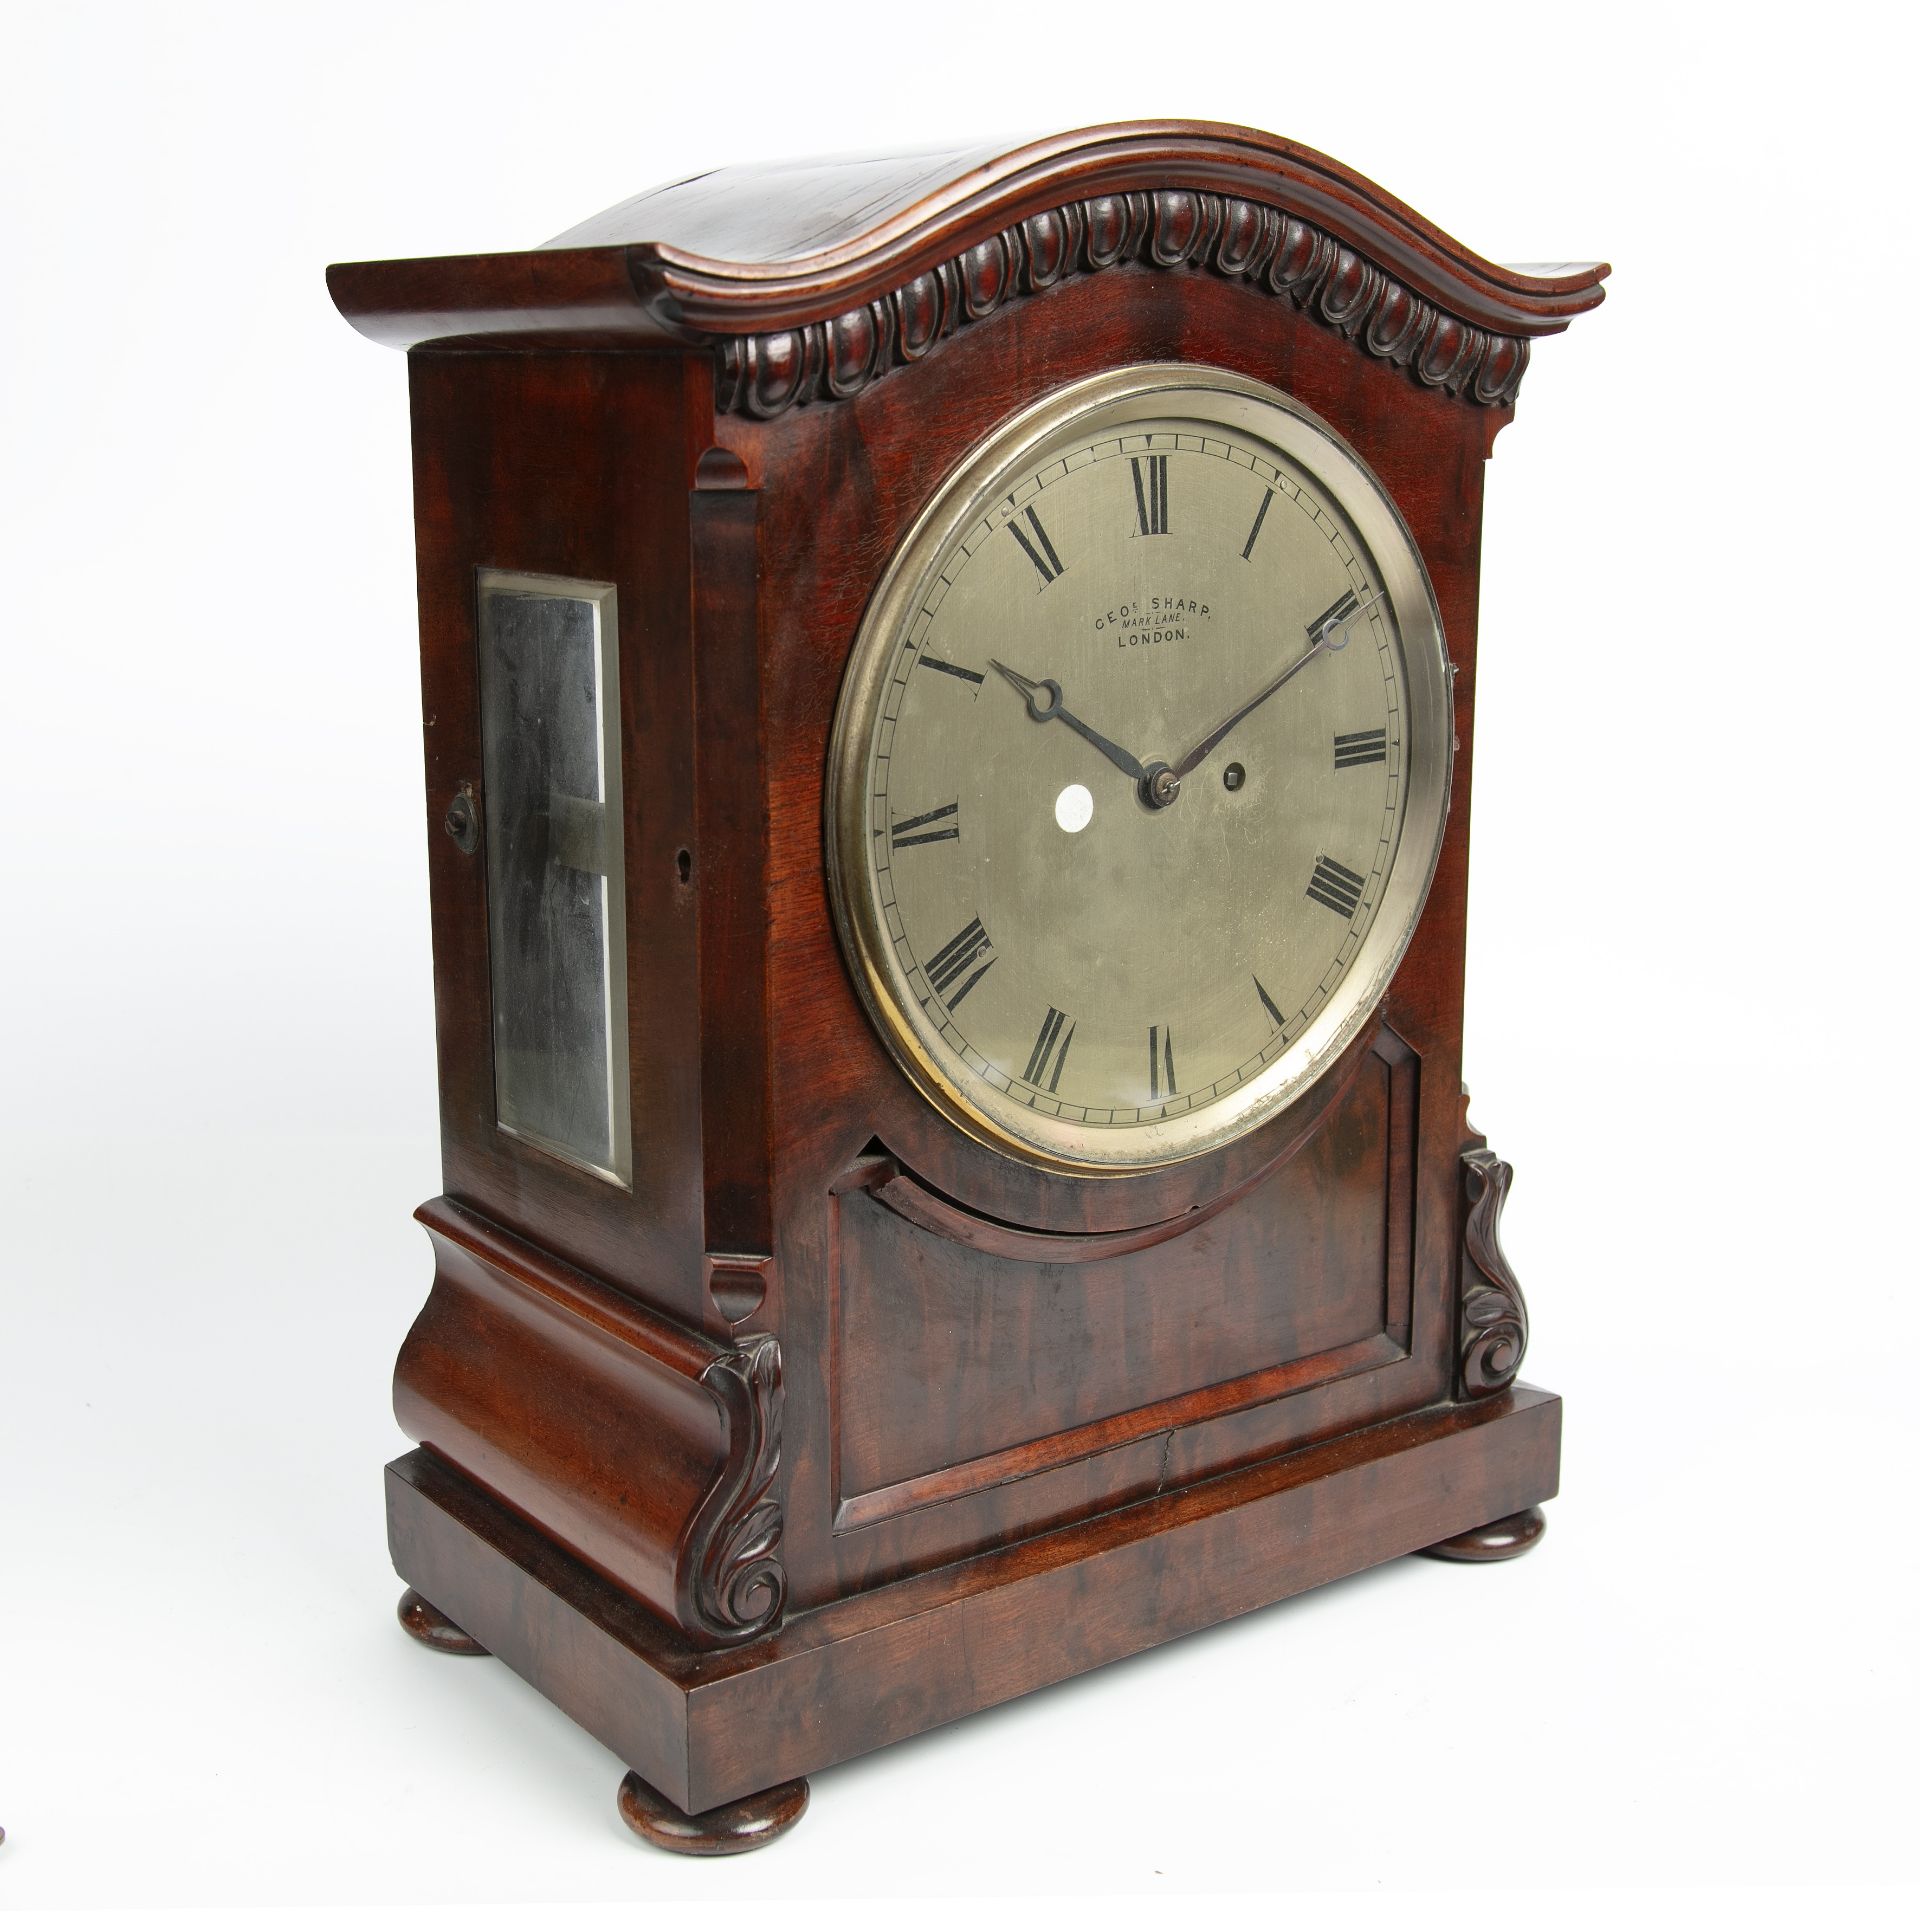 An early 19th century bracket clock by George Sharp having a silvered dial with Roman numerals and a - Bild 2 aus 5